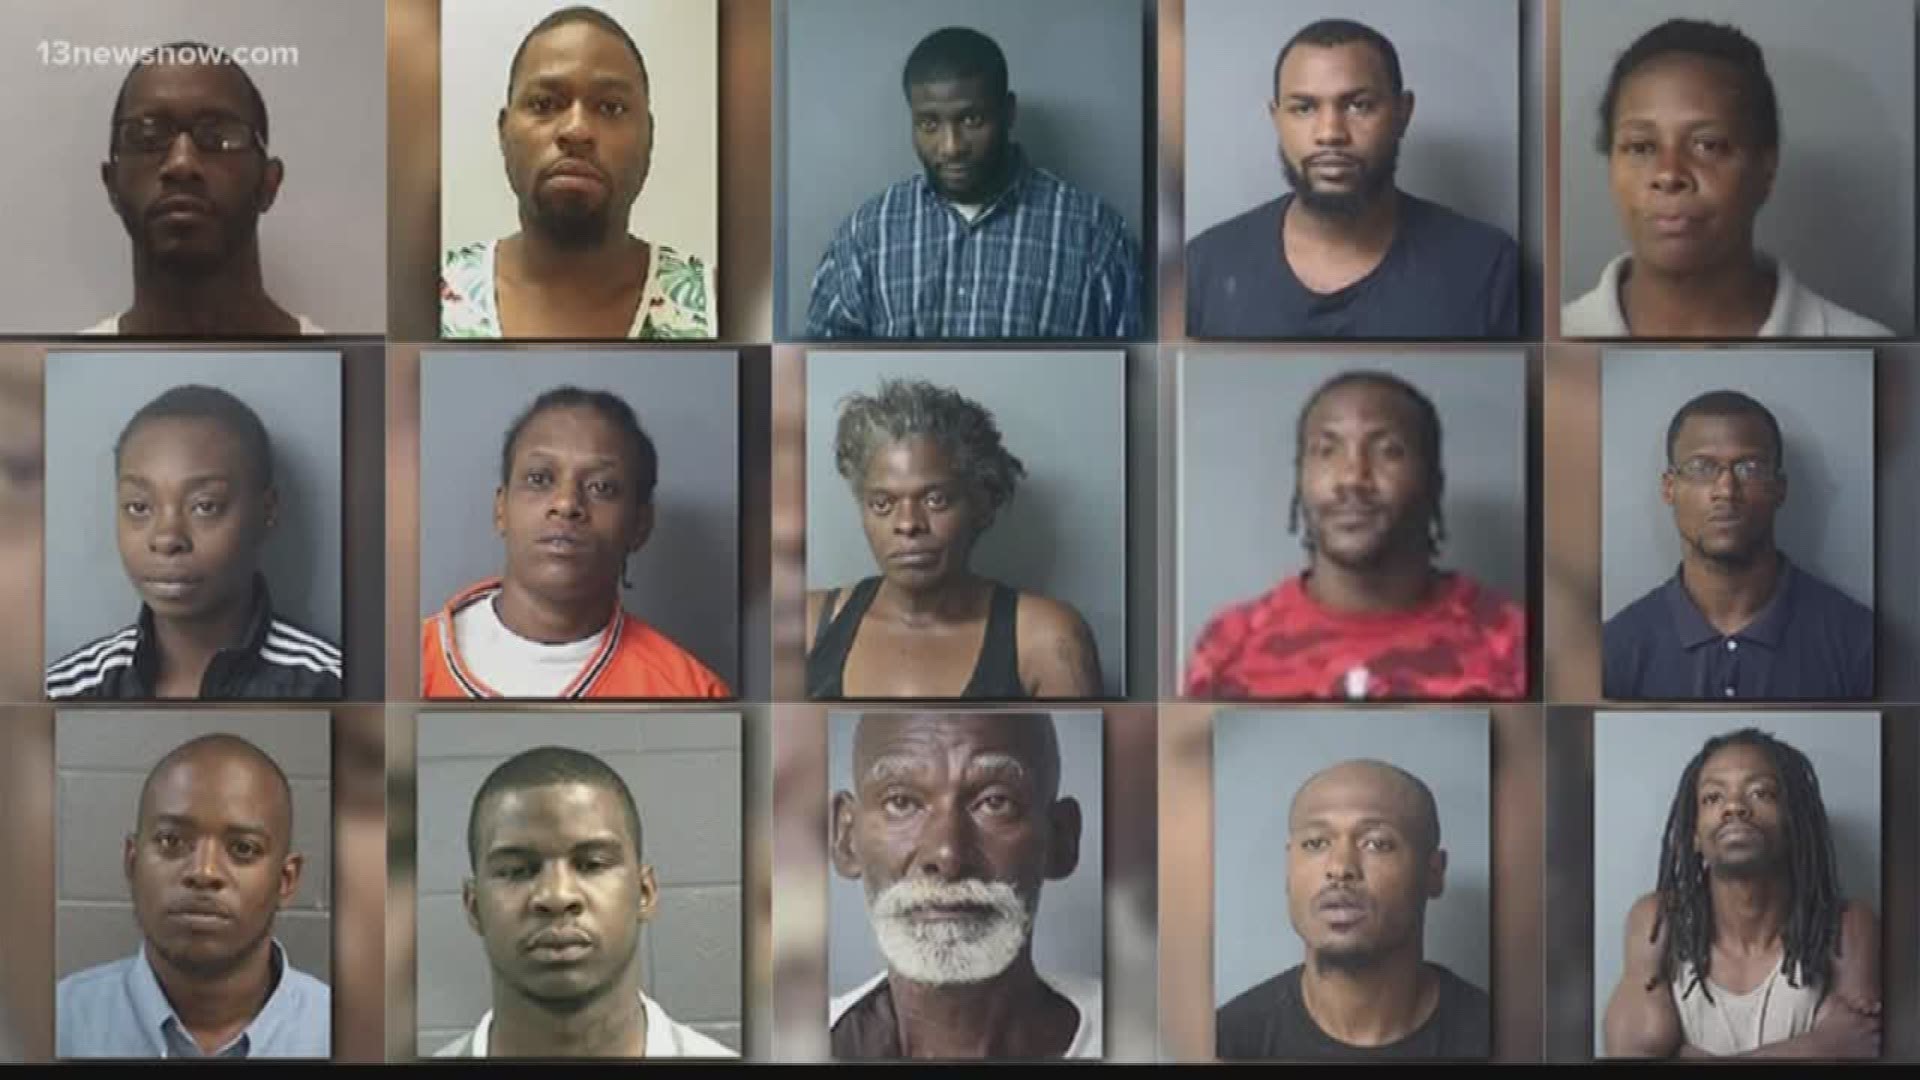 Norfolk police are searching for 15 fugitives after a three-month-long drug investigation led them to charge 59 individuals.